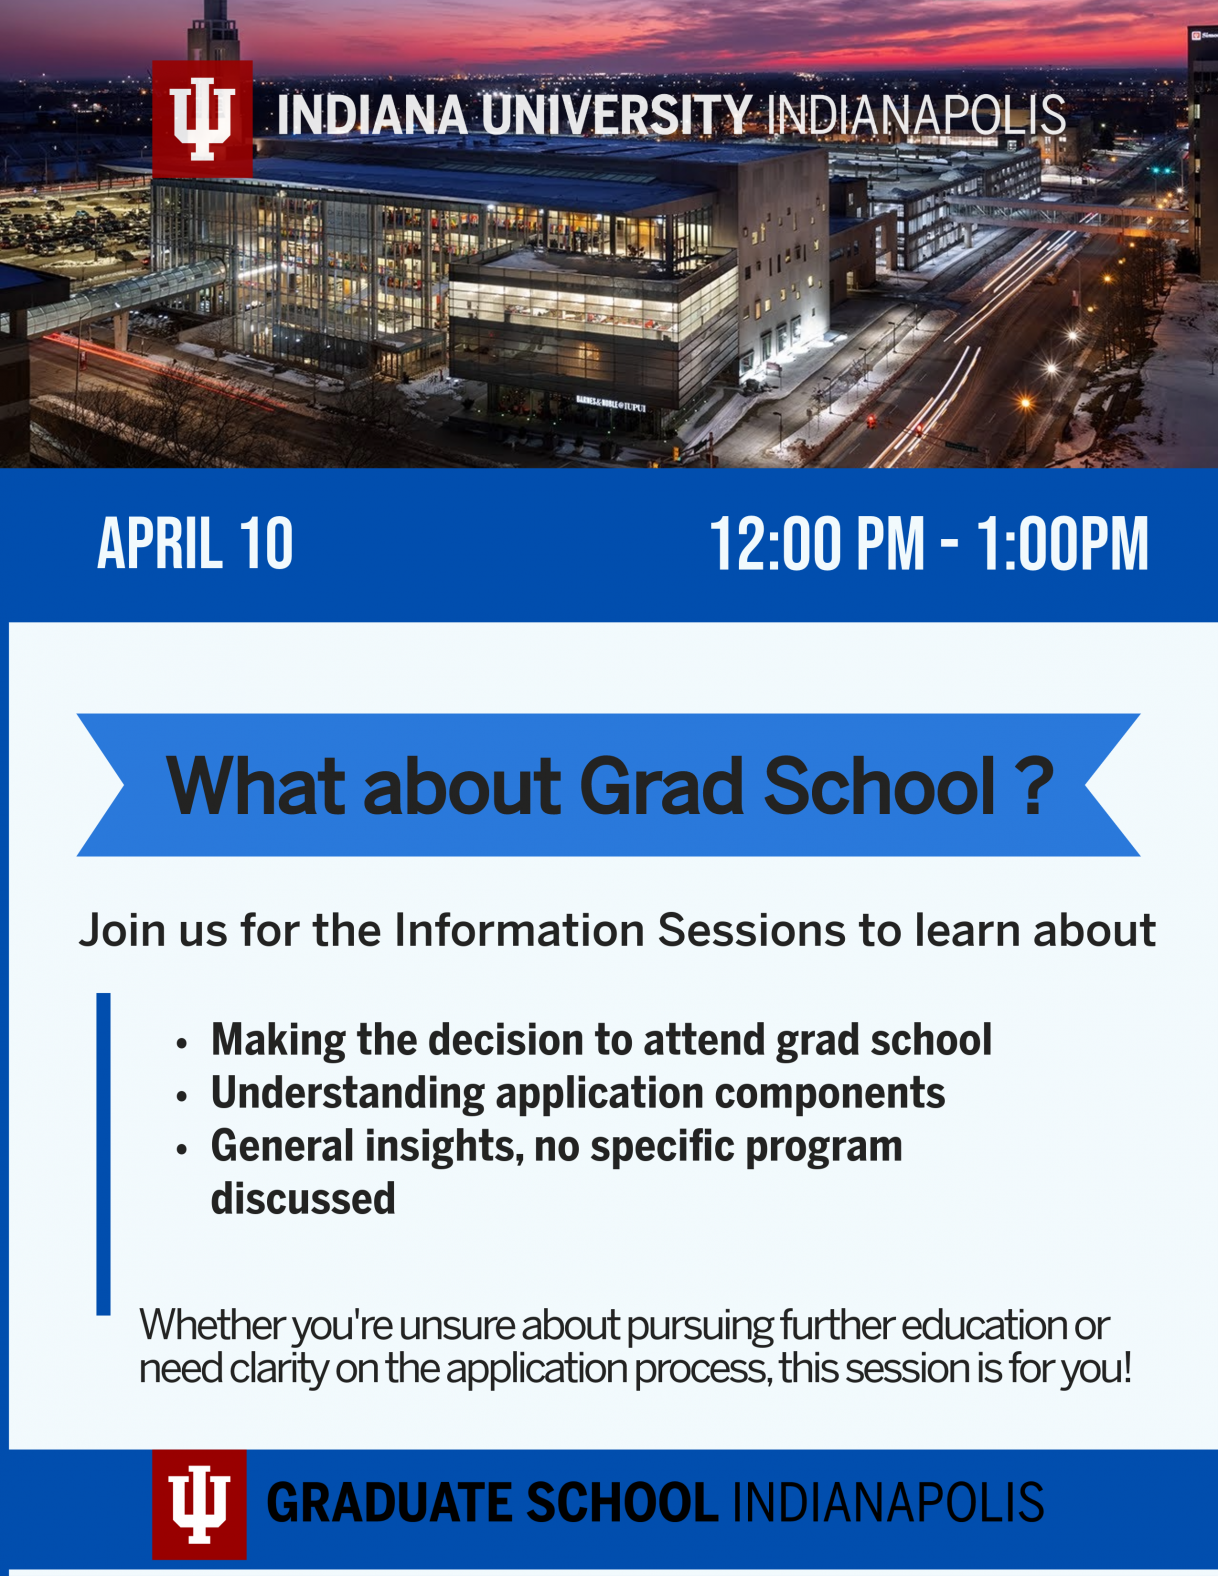 21093_a_flyer_about_iu_graduate_school_indianapolis_hosting_what_about_grad_school_information_sessions_1.rev.1710528053.png